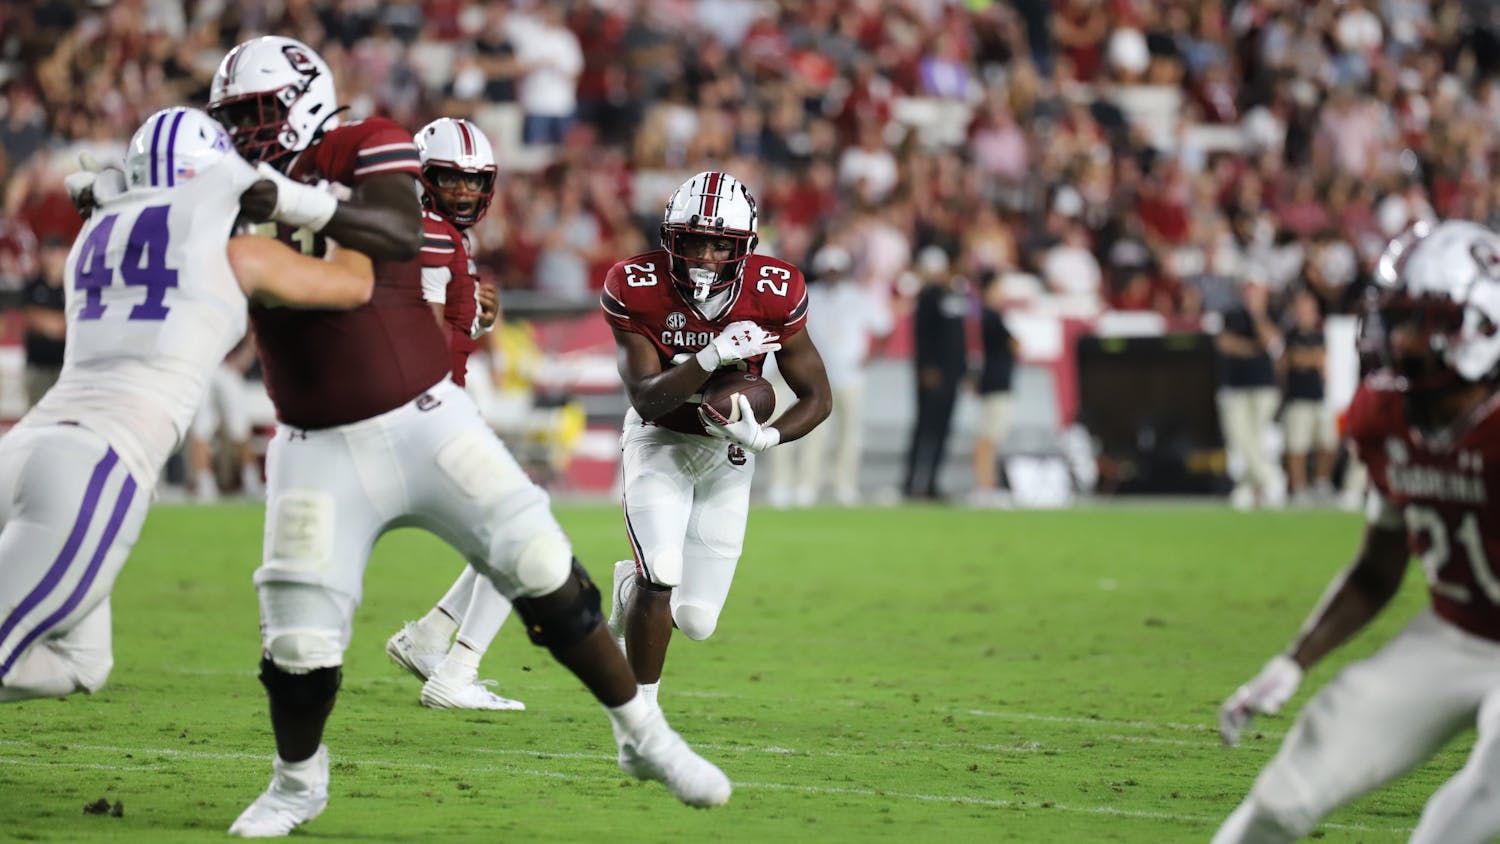 Freshman running back Djay Braswell searches for a hole late in South Carolina's 47-21 win over Furman. The win was the Gamecocks' first of the season in its first home game since defeating Tennessee in late 2022.